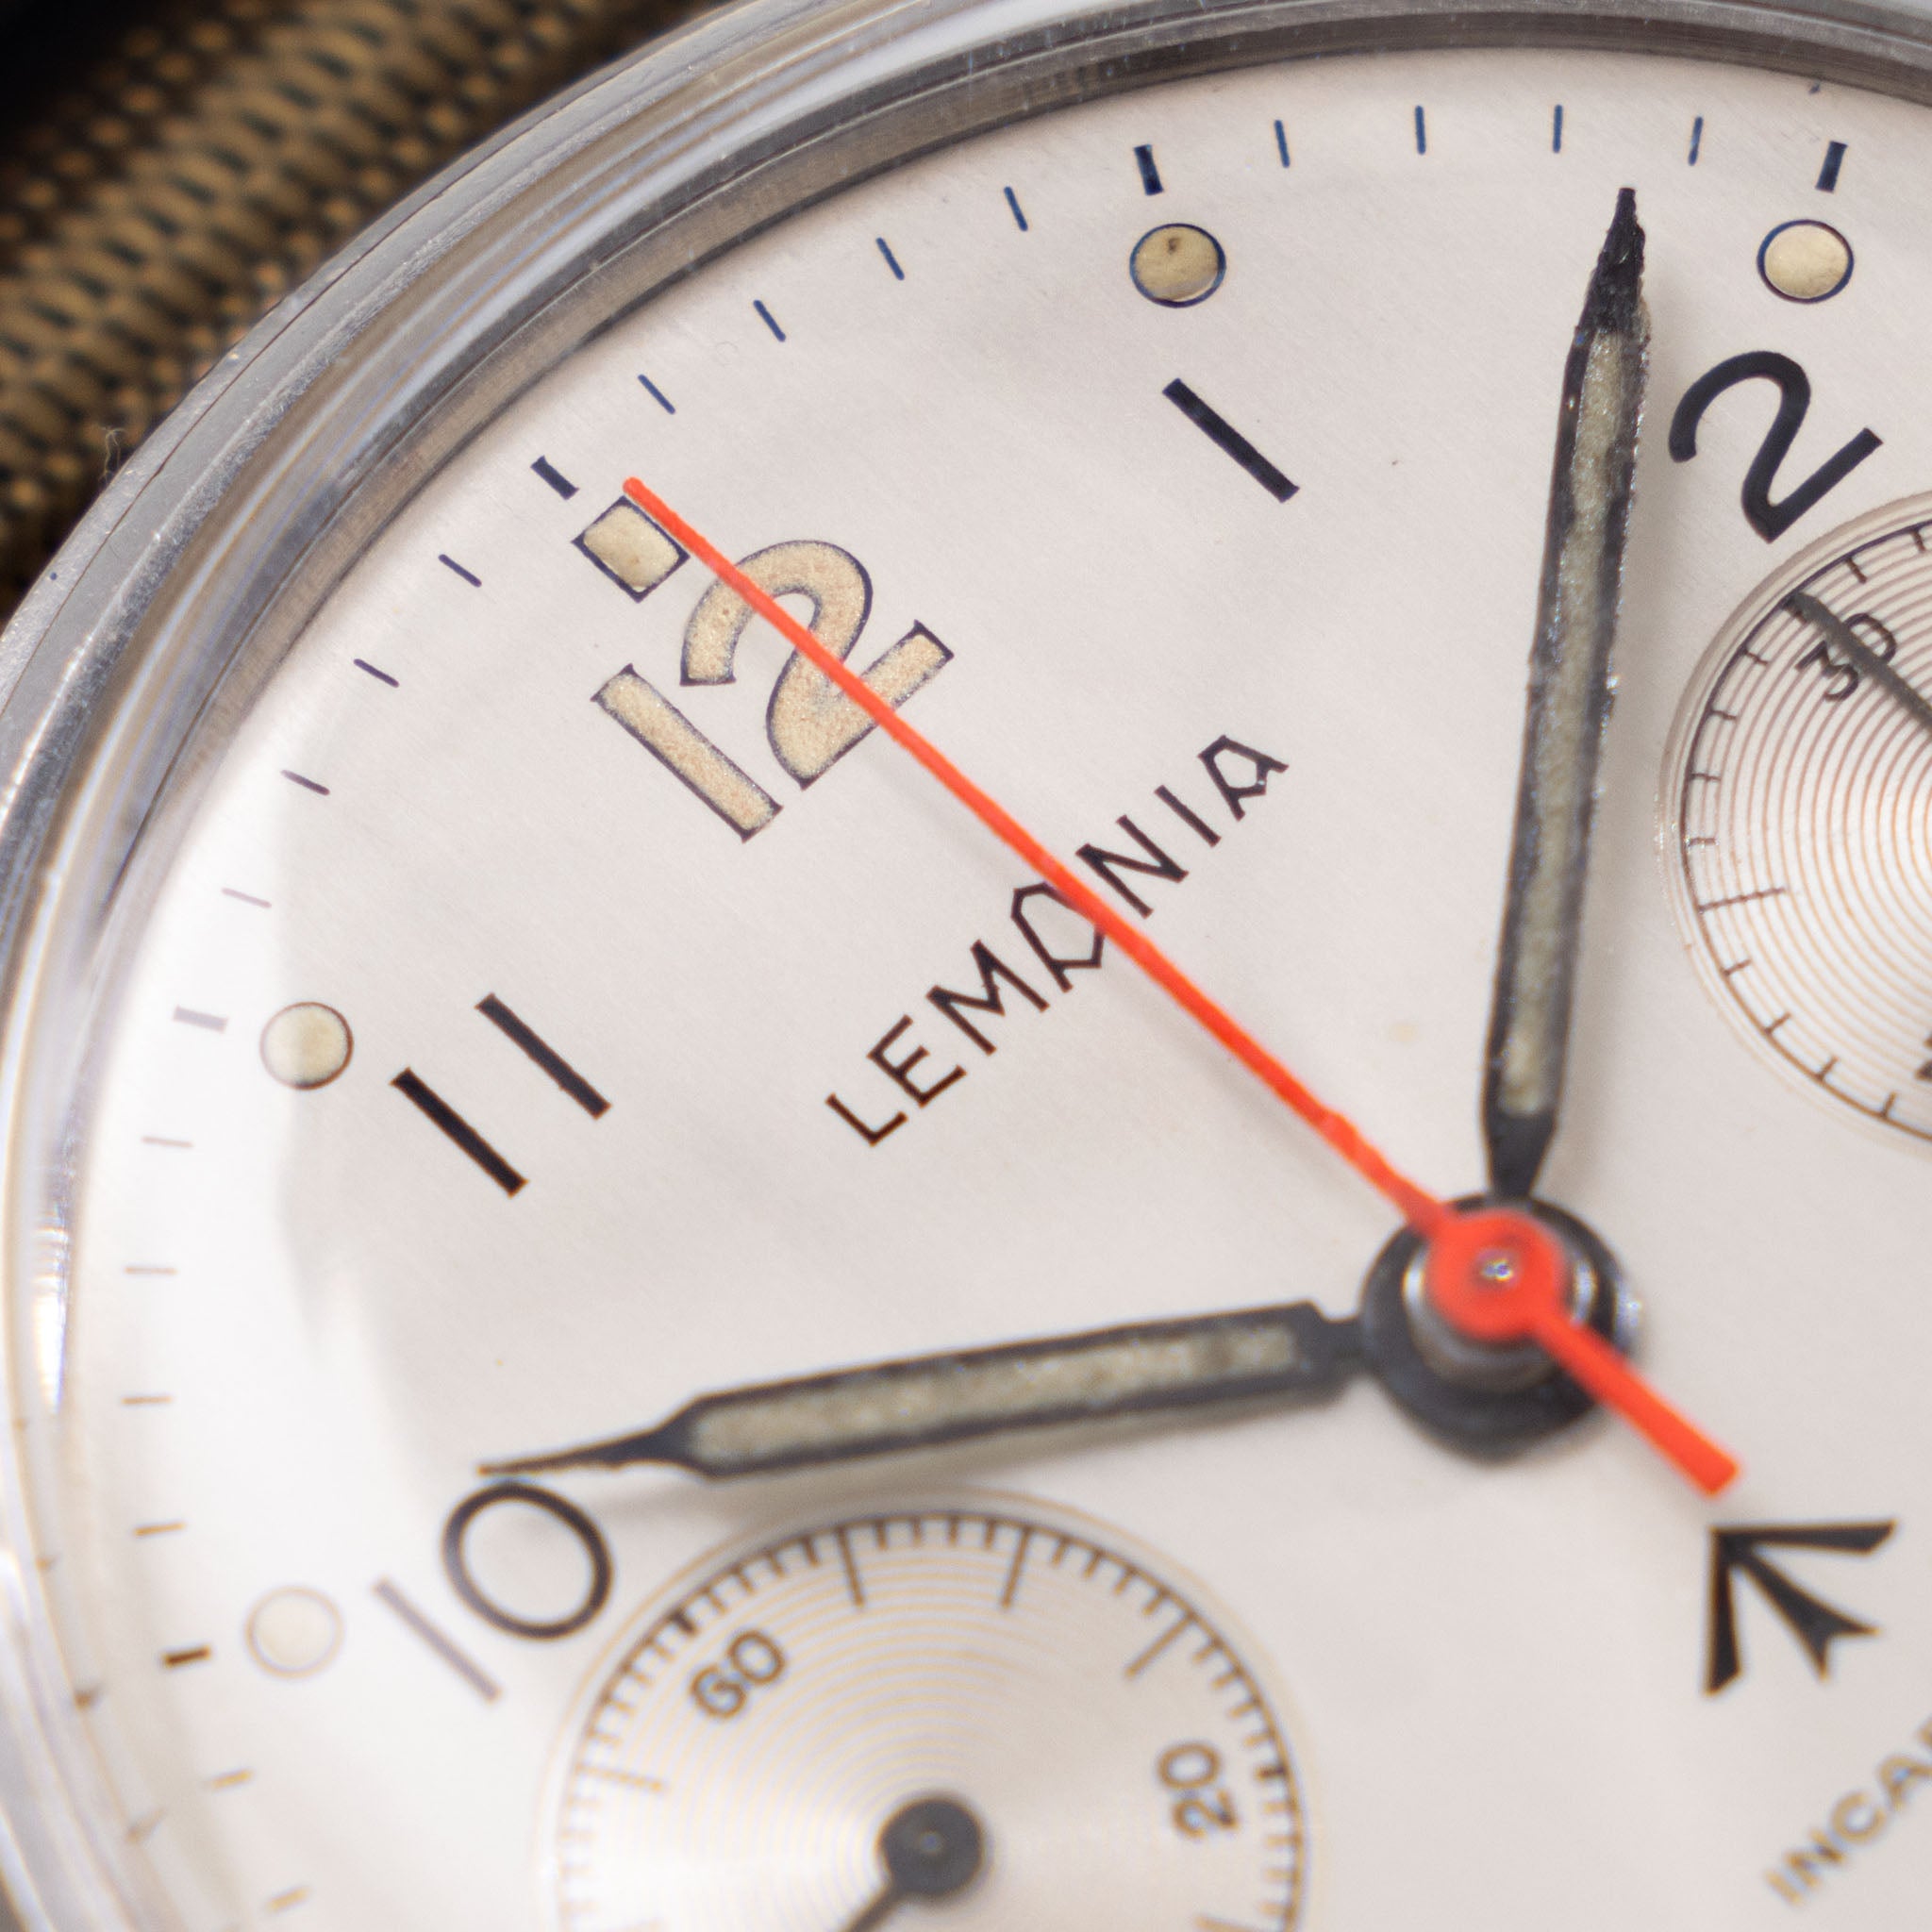 Lemania Monopusher Chronograph Issued to British Armed Forces